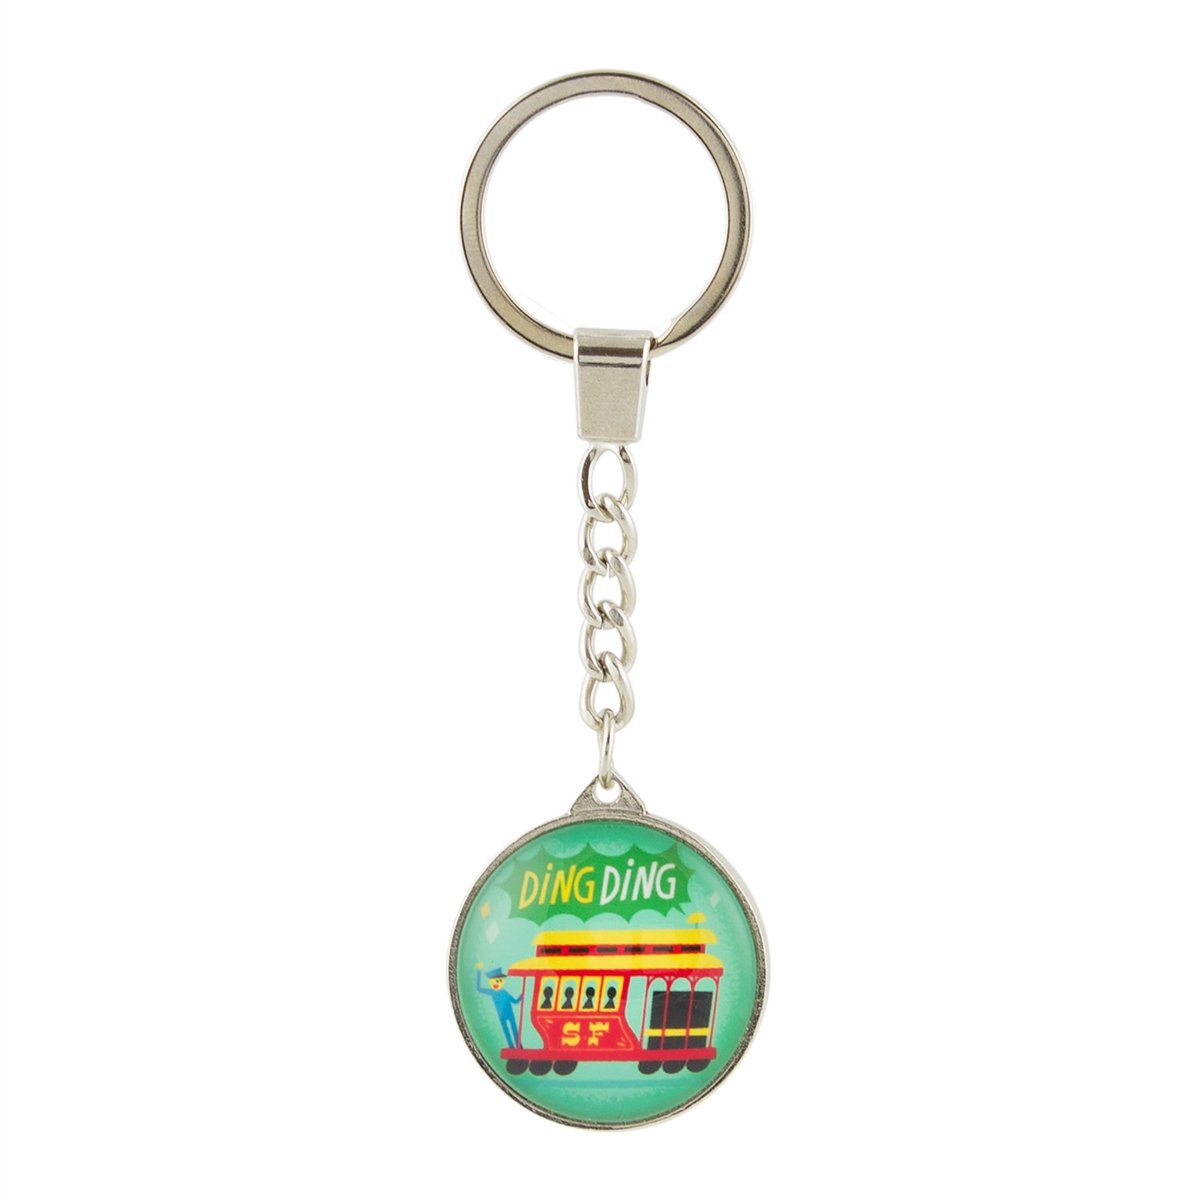 Colorful crystal keychain with vintage-inspired illustrations of San Francisco cable car with text "Ding Ding."